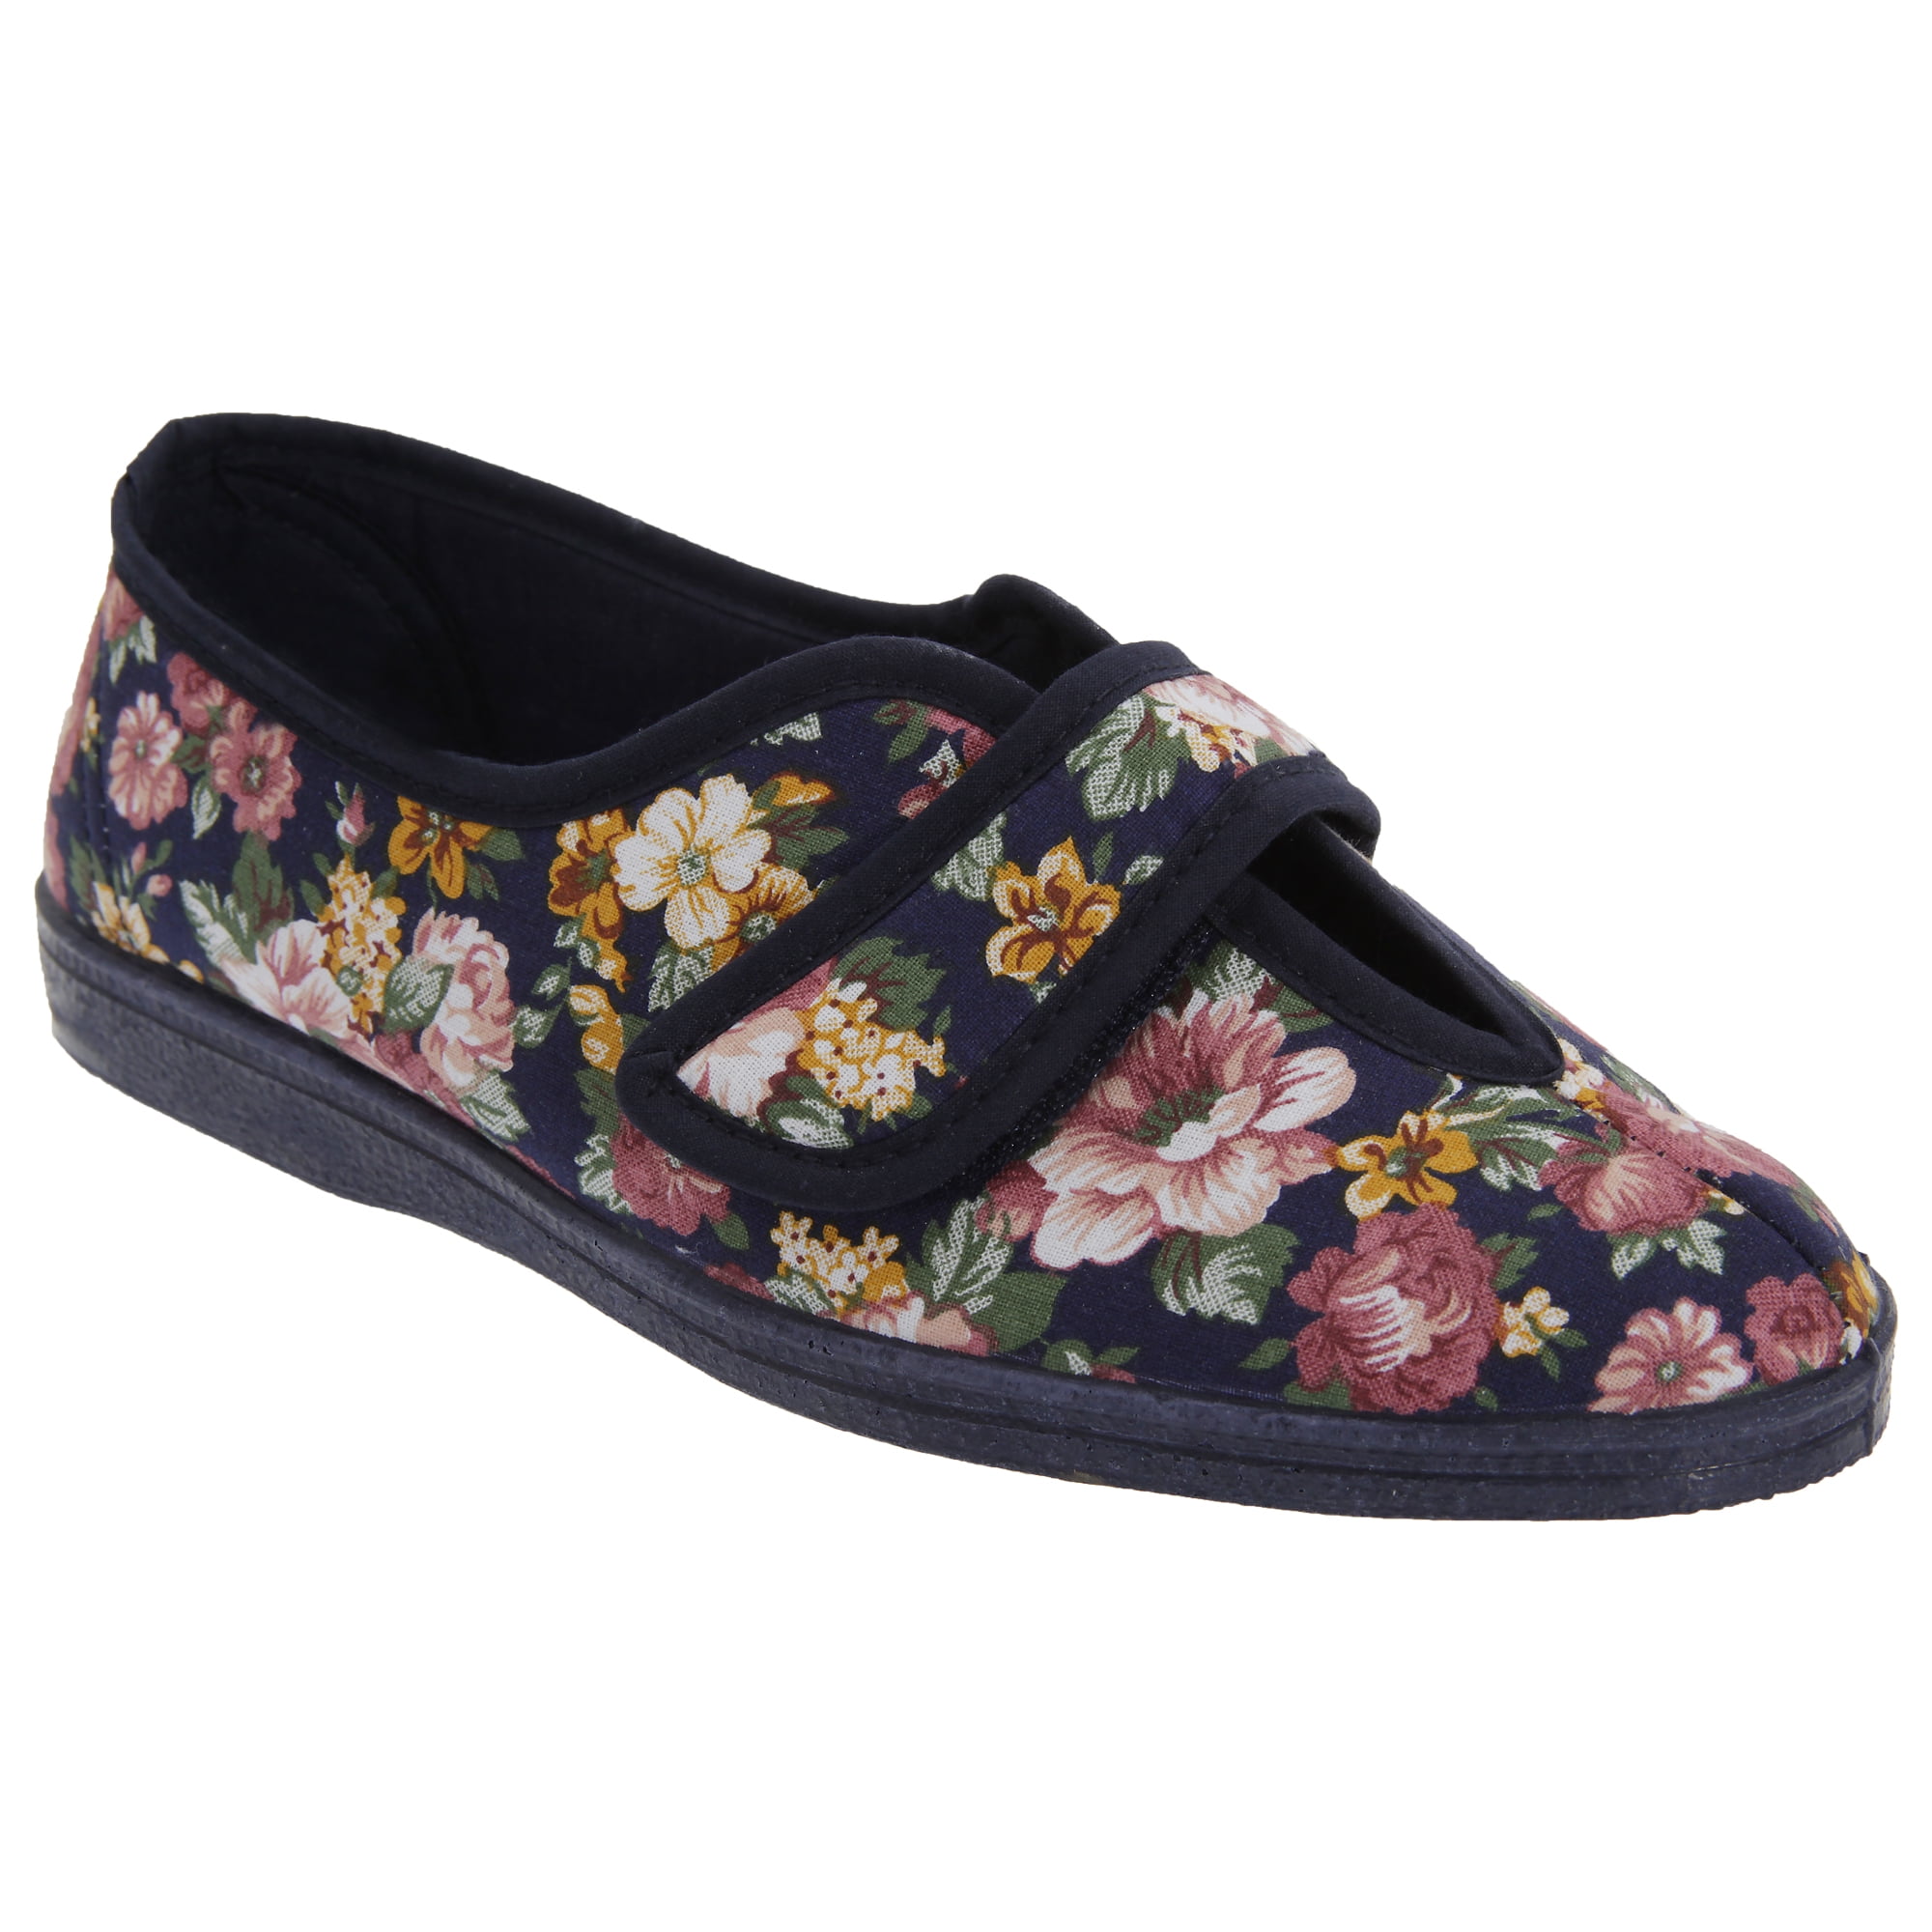 Sleepers ROSE Womens Ladies Cotton Roll Top Floral Full Slippers Shoes Navy Blue 